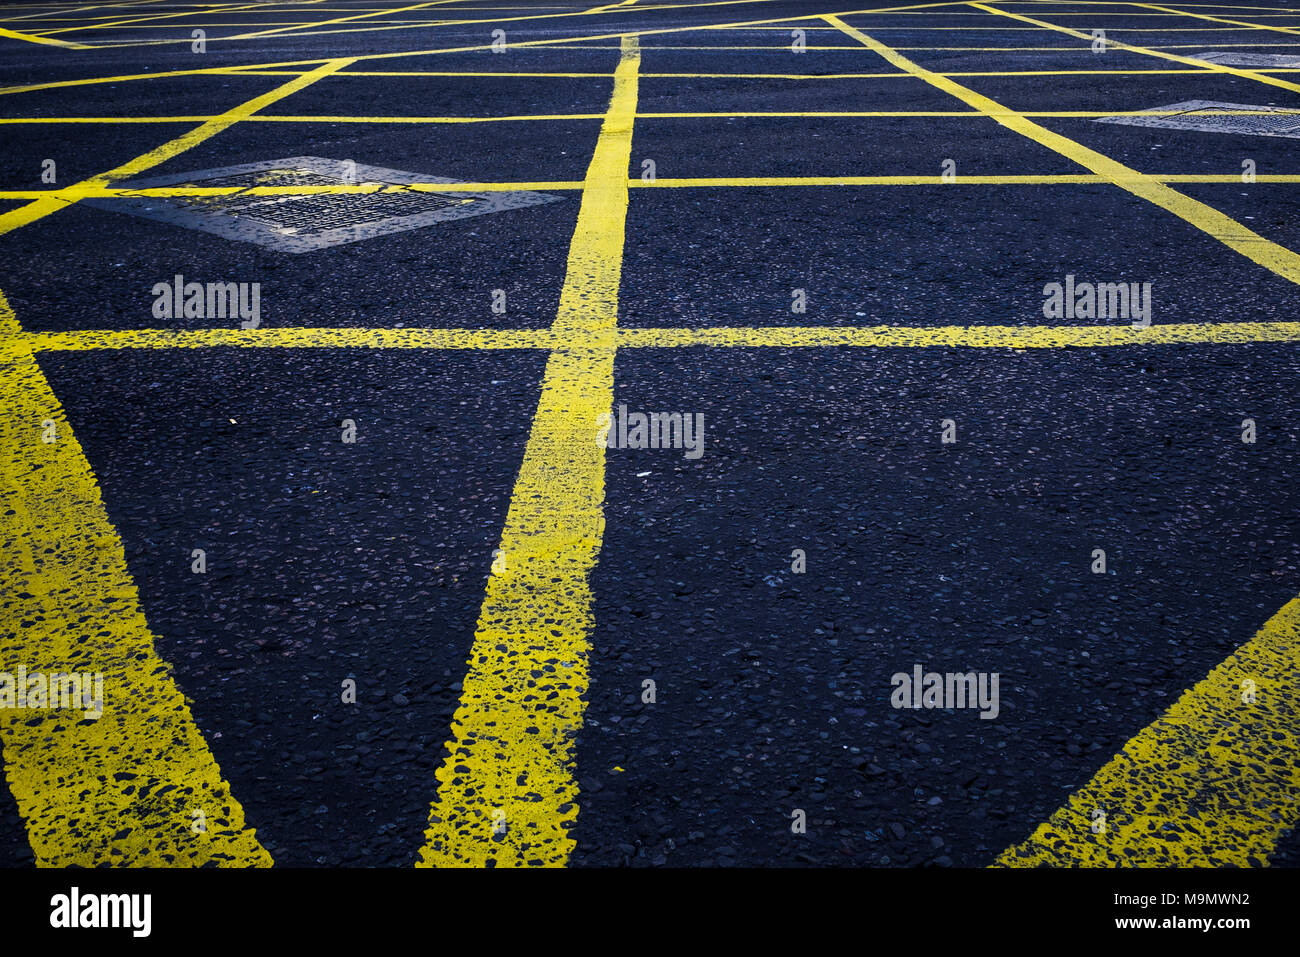 Road markings at traffic light intersection, abstract, London, England, Great Britain Stock Photo